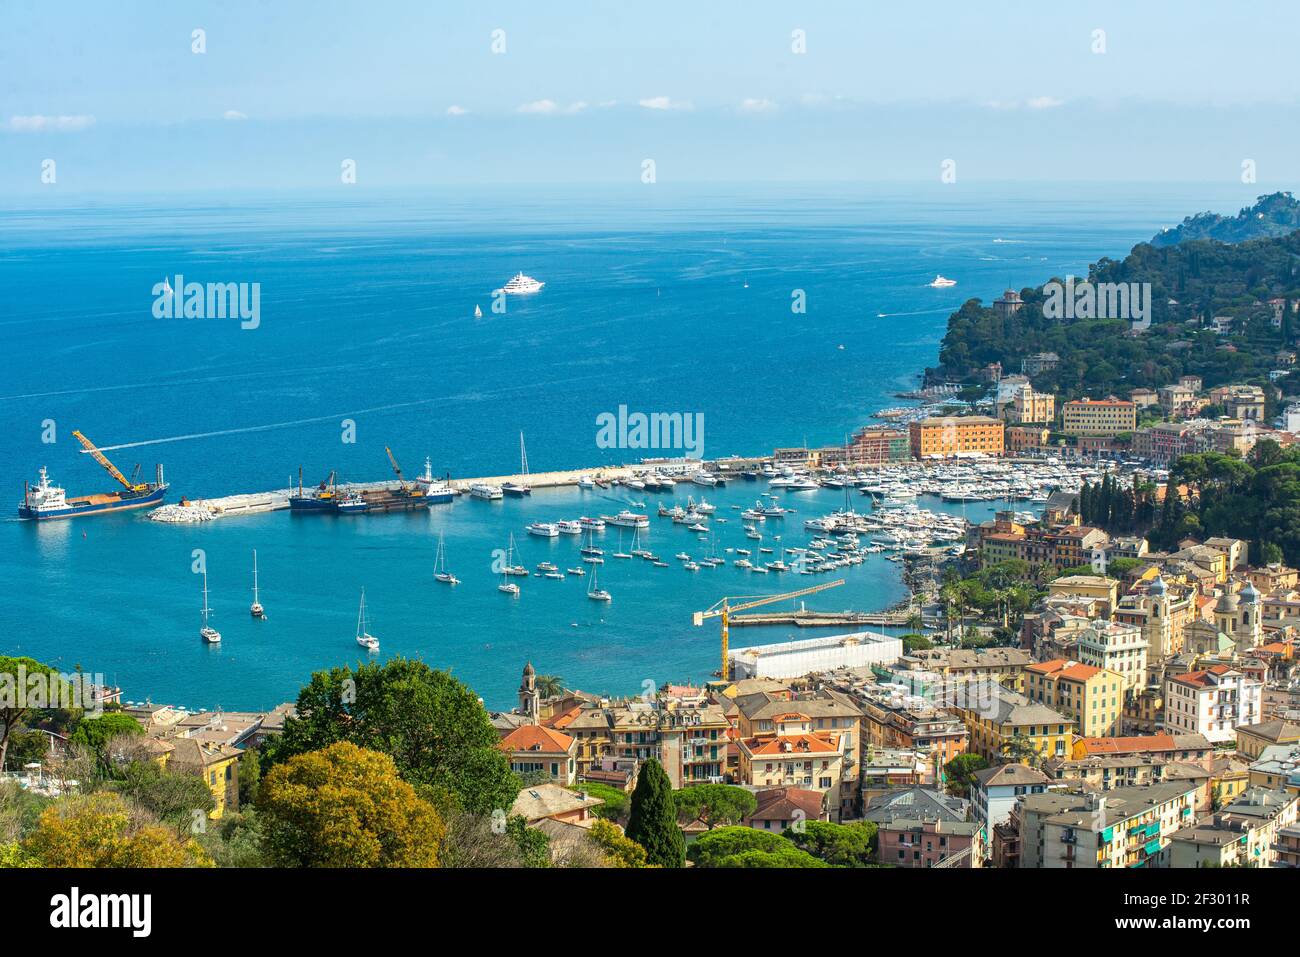 Santa Margherita Ligure and its hrabour in the heart of the city. Distant view, high viewpoint Stock Photo